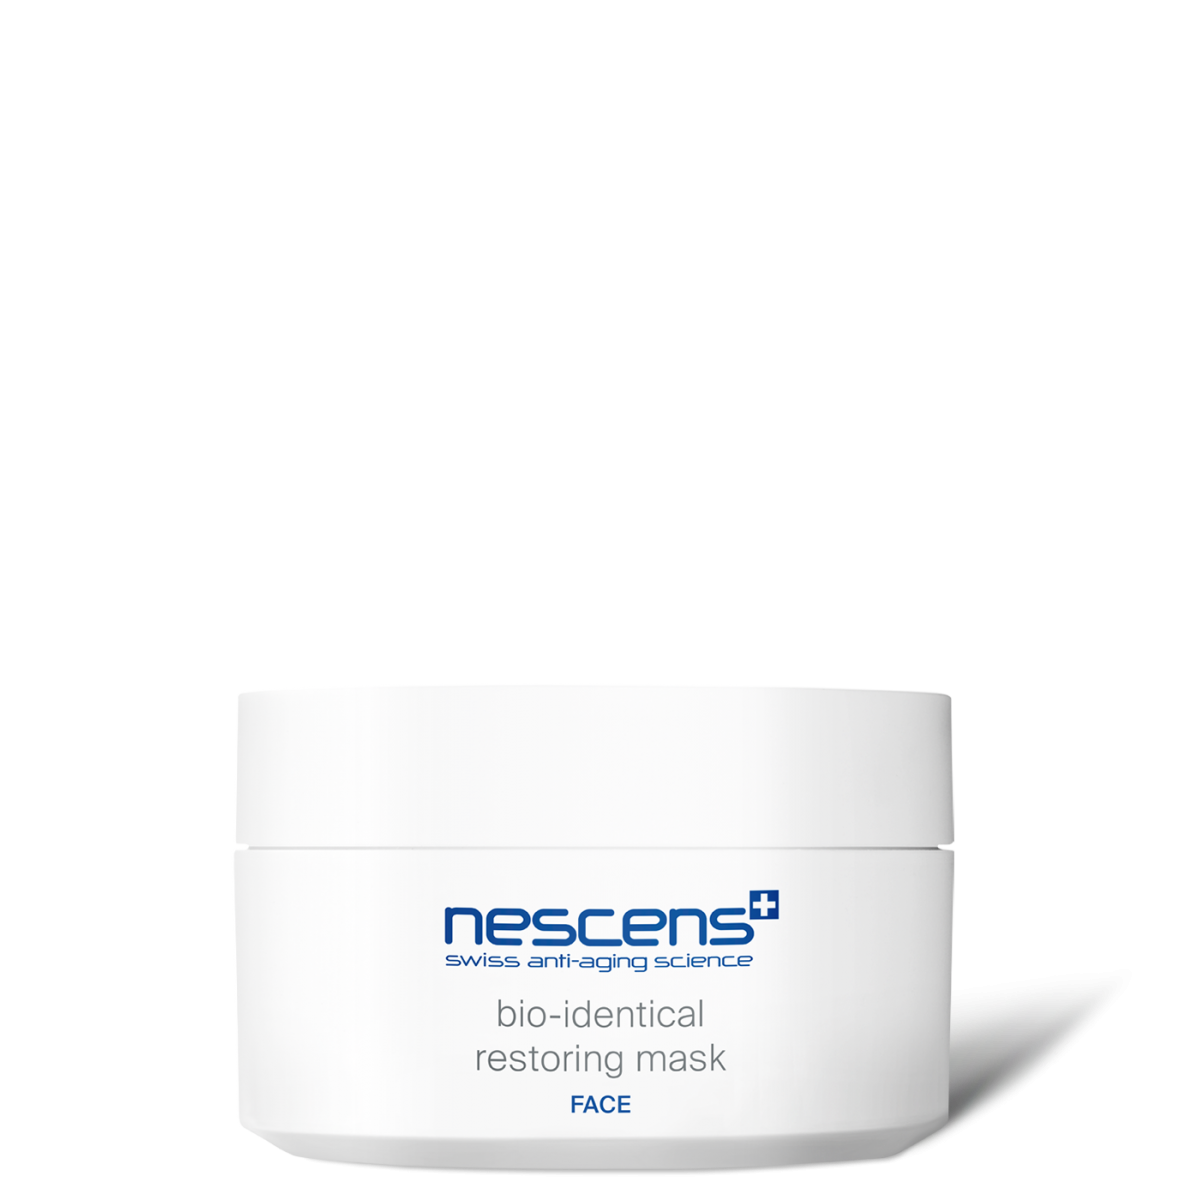 The Bio-identical Restoring Face Mask activates tissue restoration for a moisturized, rehydrated and firm skin